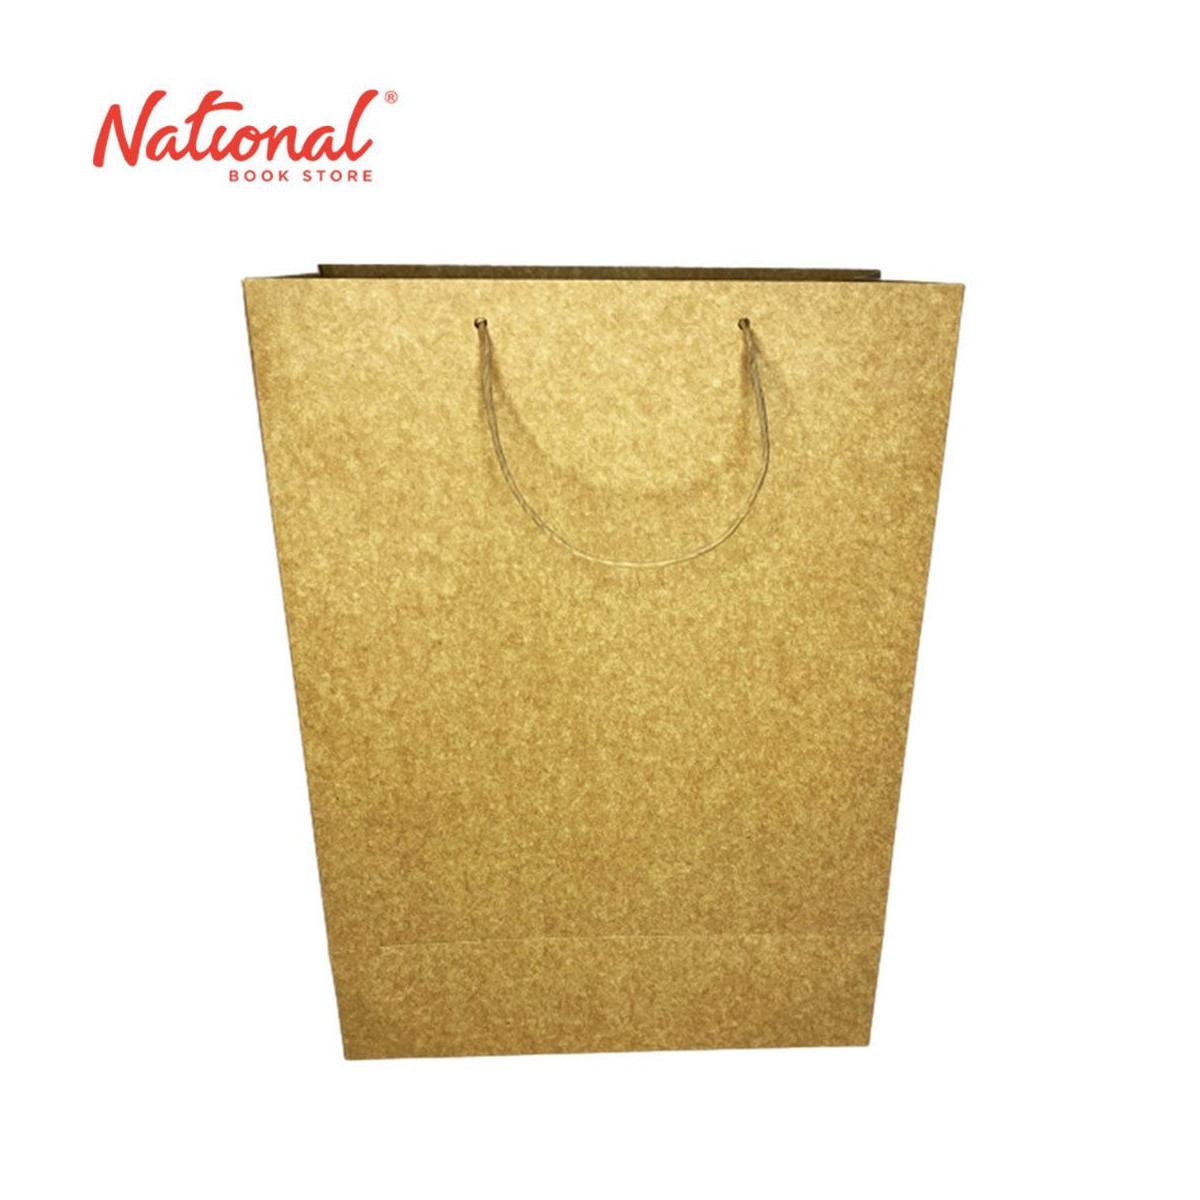 Plain Kraft Gift Bag Special 3 Pieces Large 23x9x29.2cm - Gift Supplies